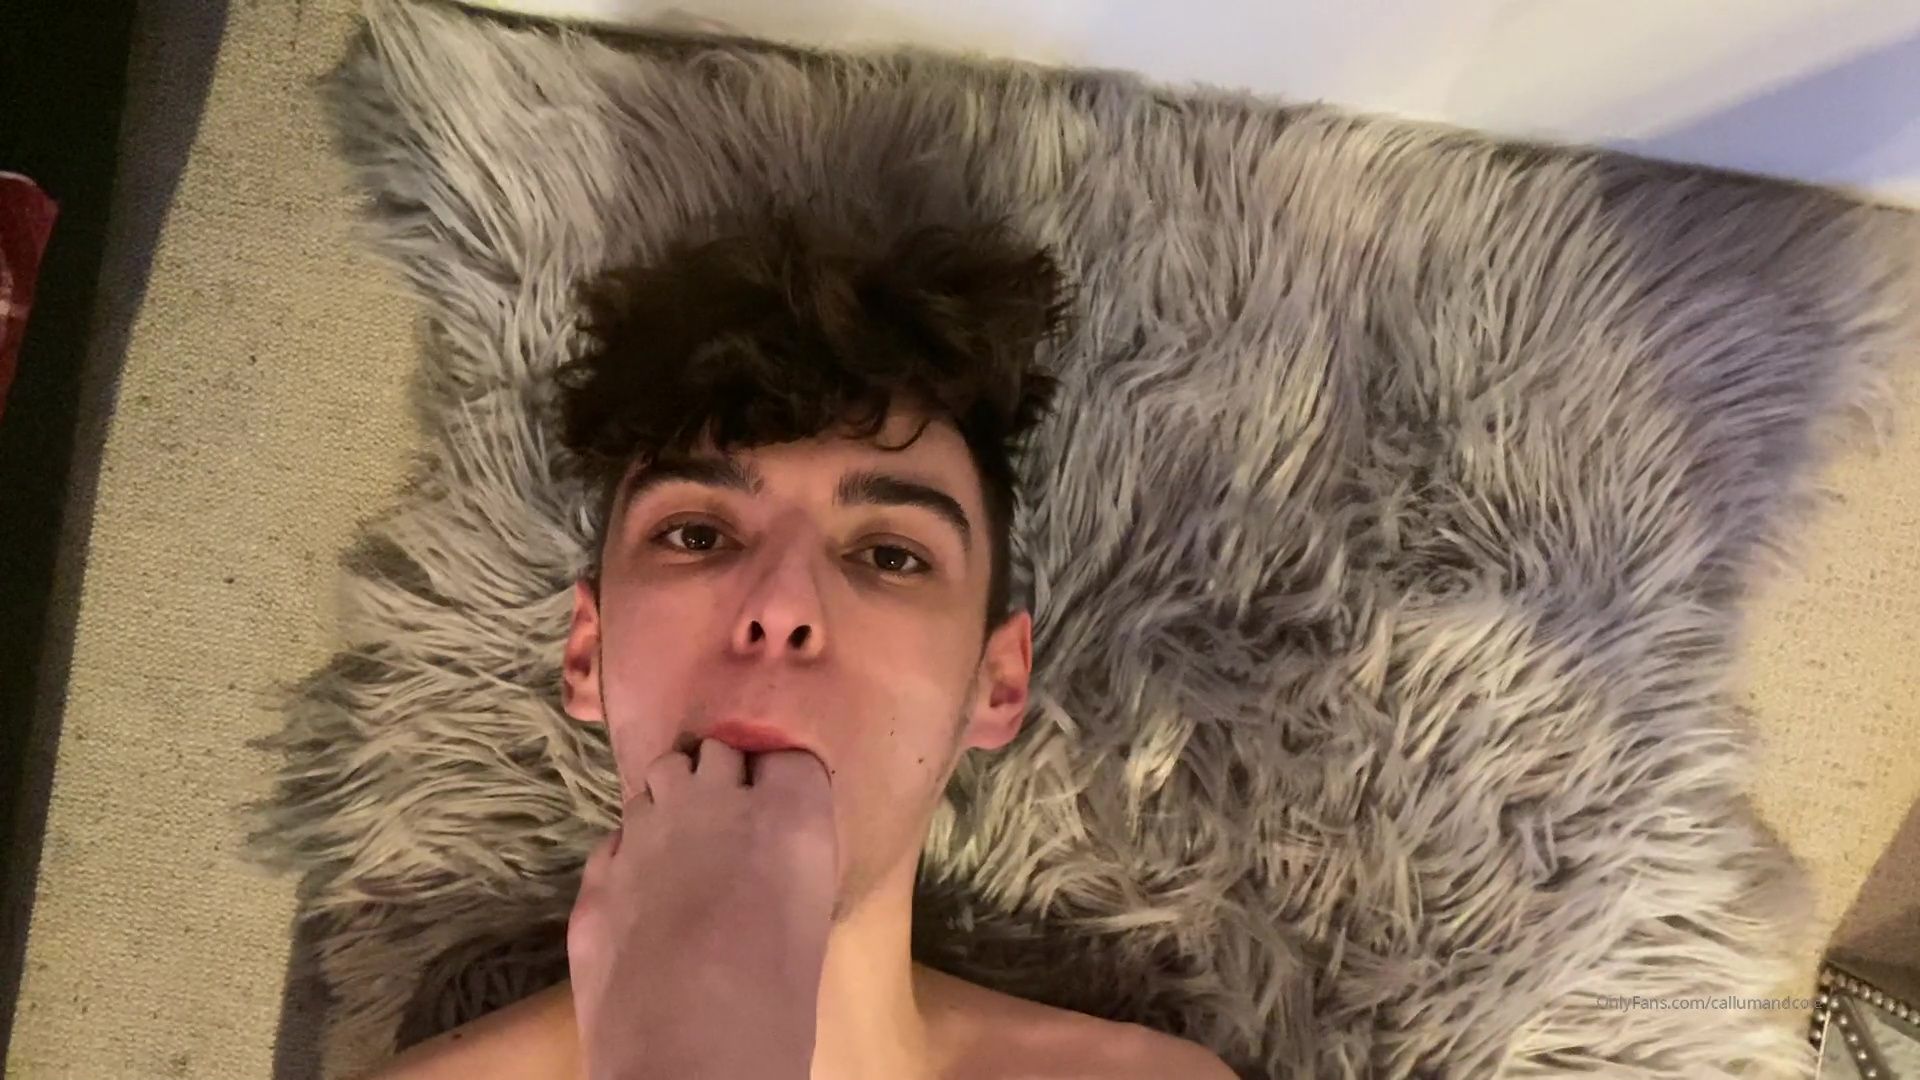 ♺ OnlyFans - Callum and Cole (April 2020 videos) .